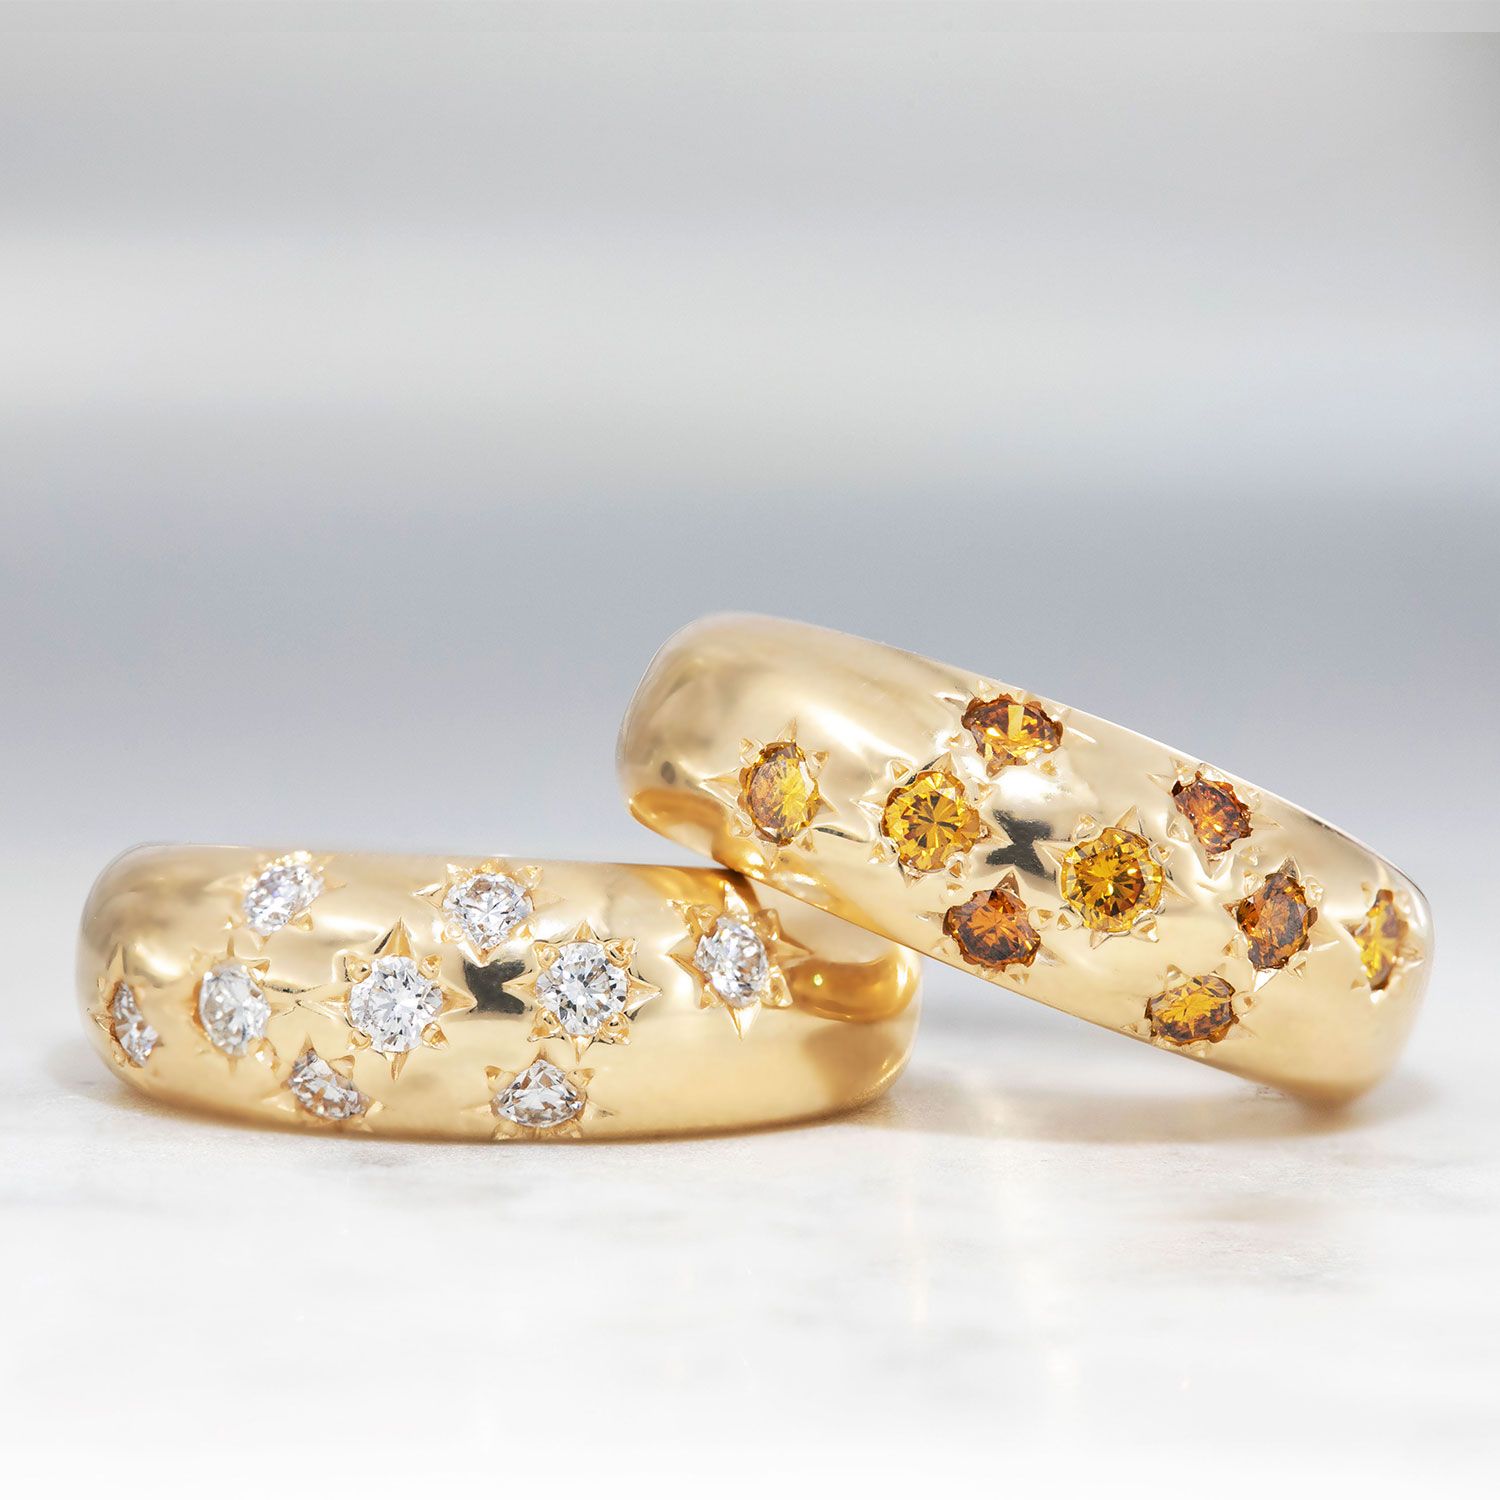 Starry Yellow Diamond Dome Ring – Maidor Within Starry Yellow Diamond Dome Rings (View 6 of 25)